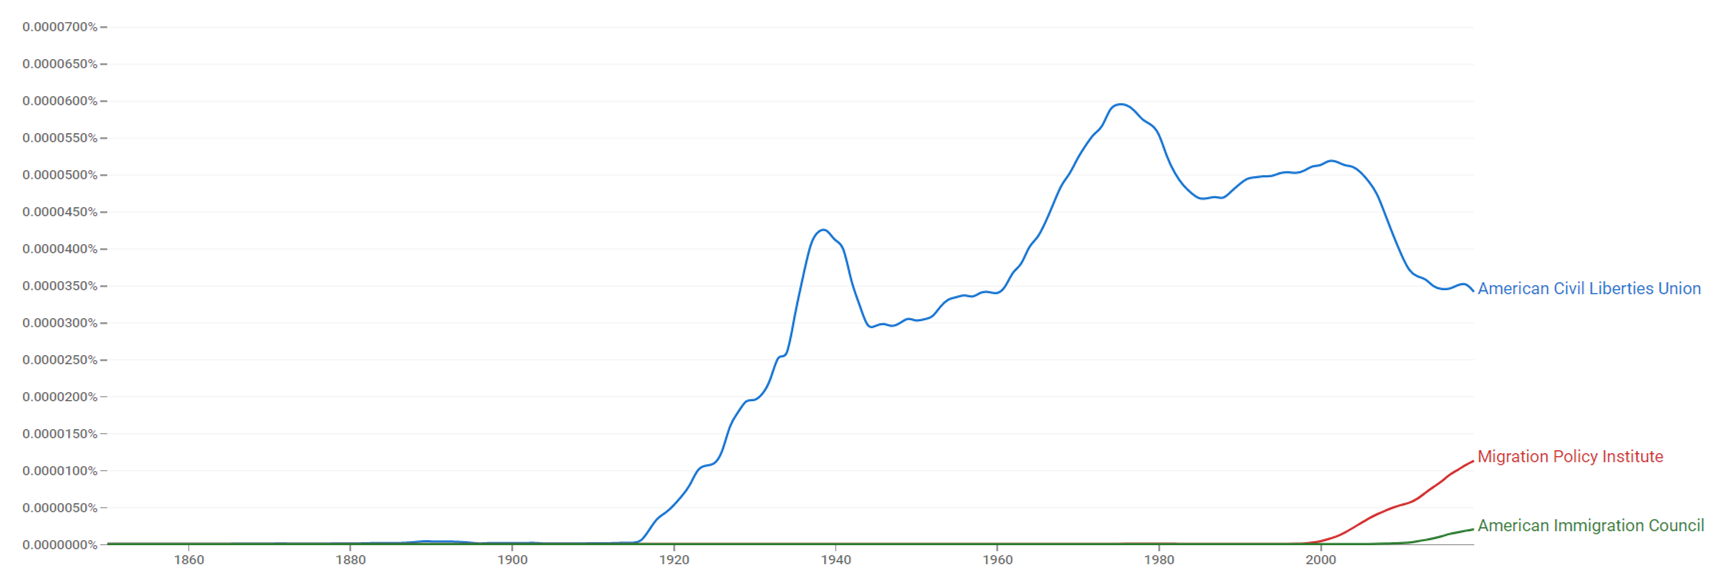 American Civil Liberties Union, Migration Policy Institute and American Immigration Council ngram.png